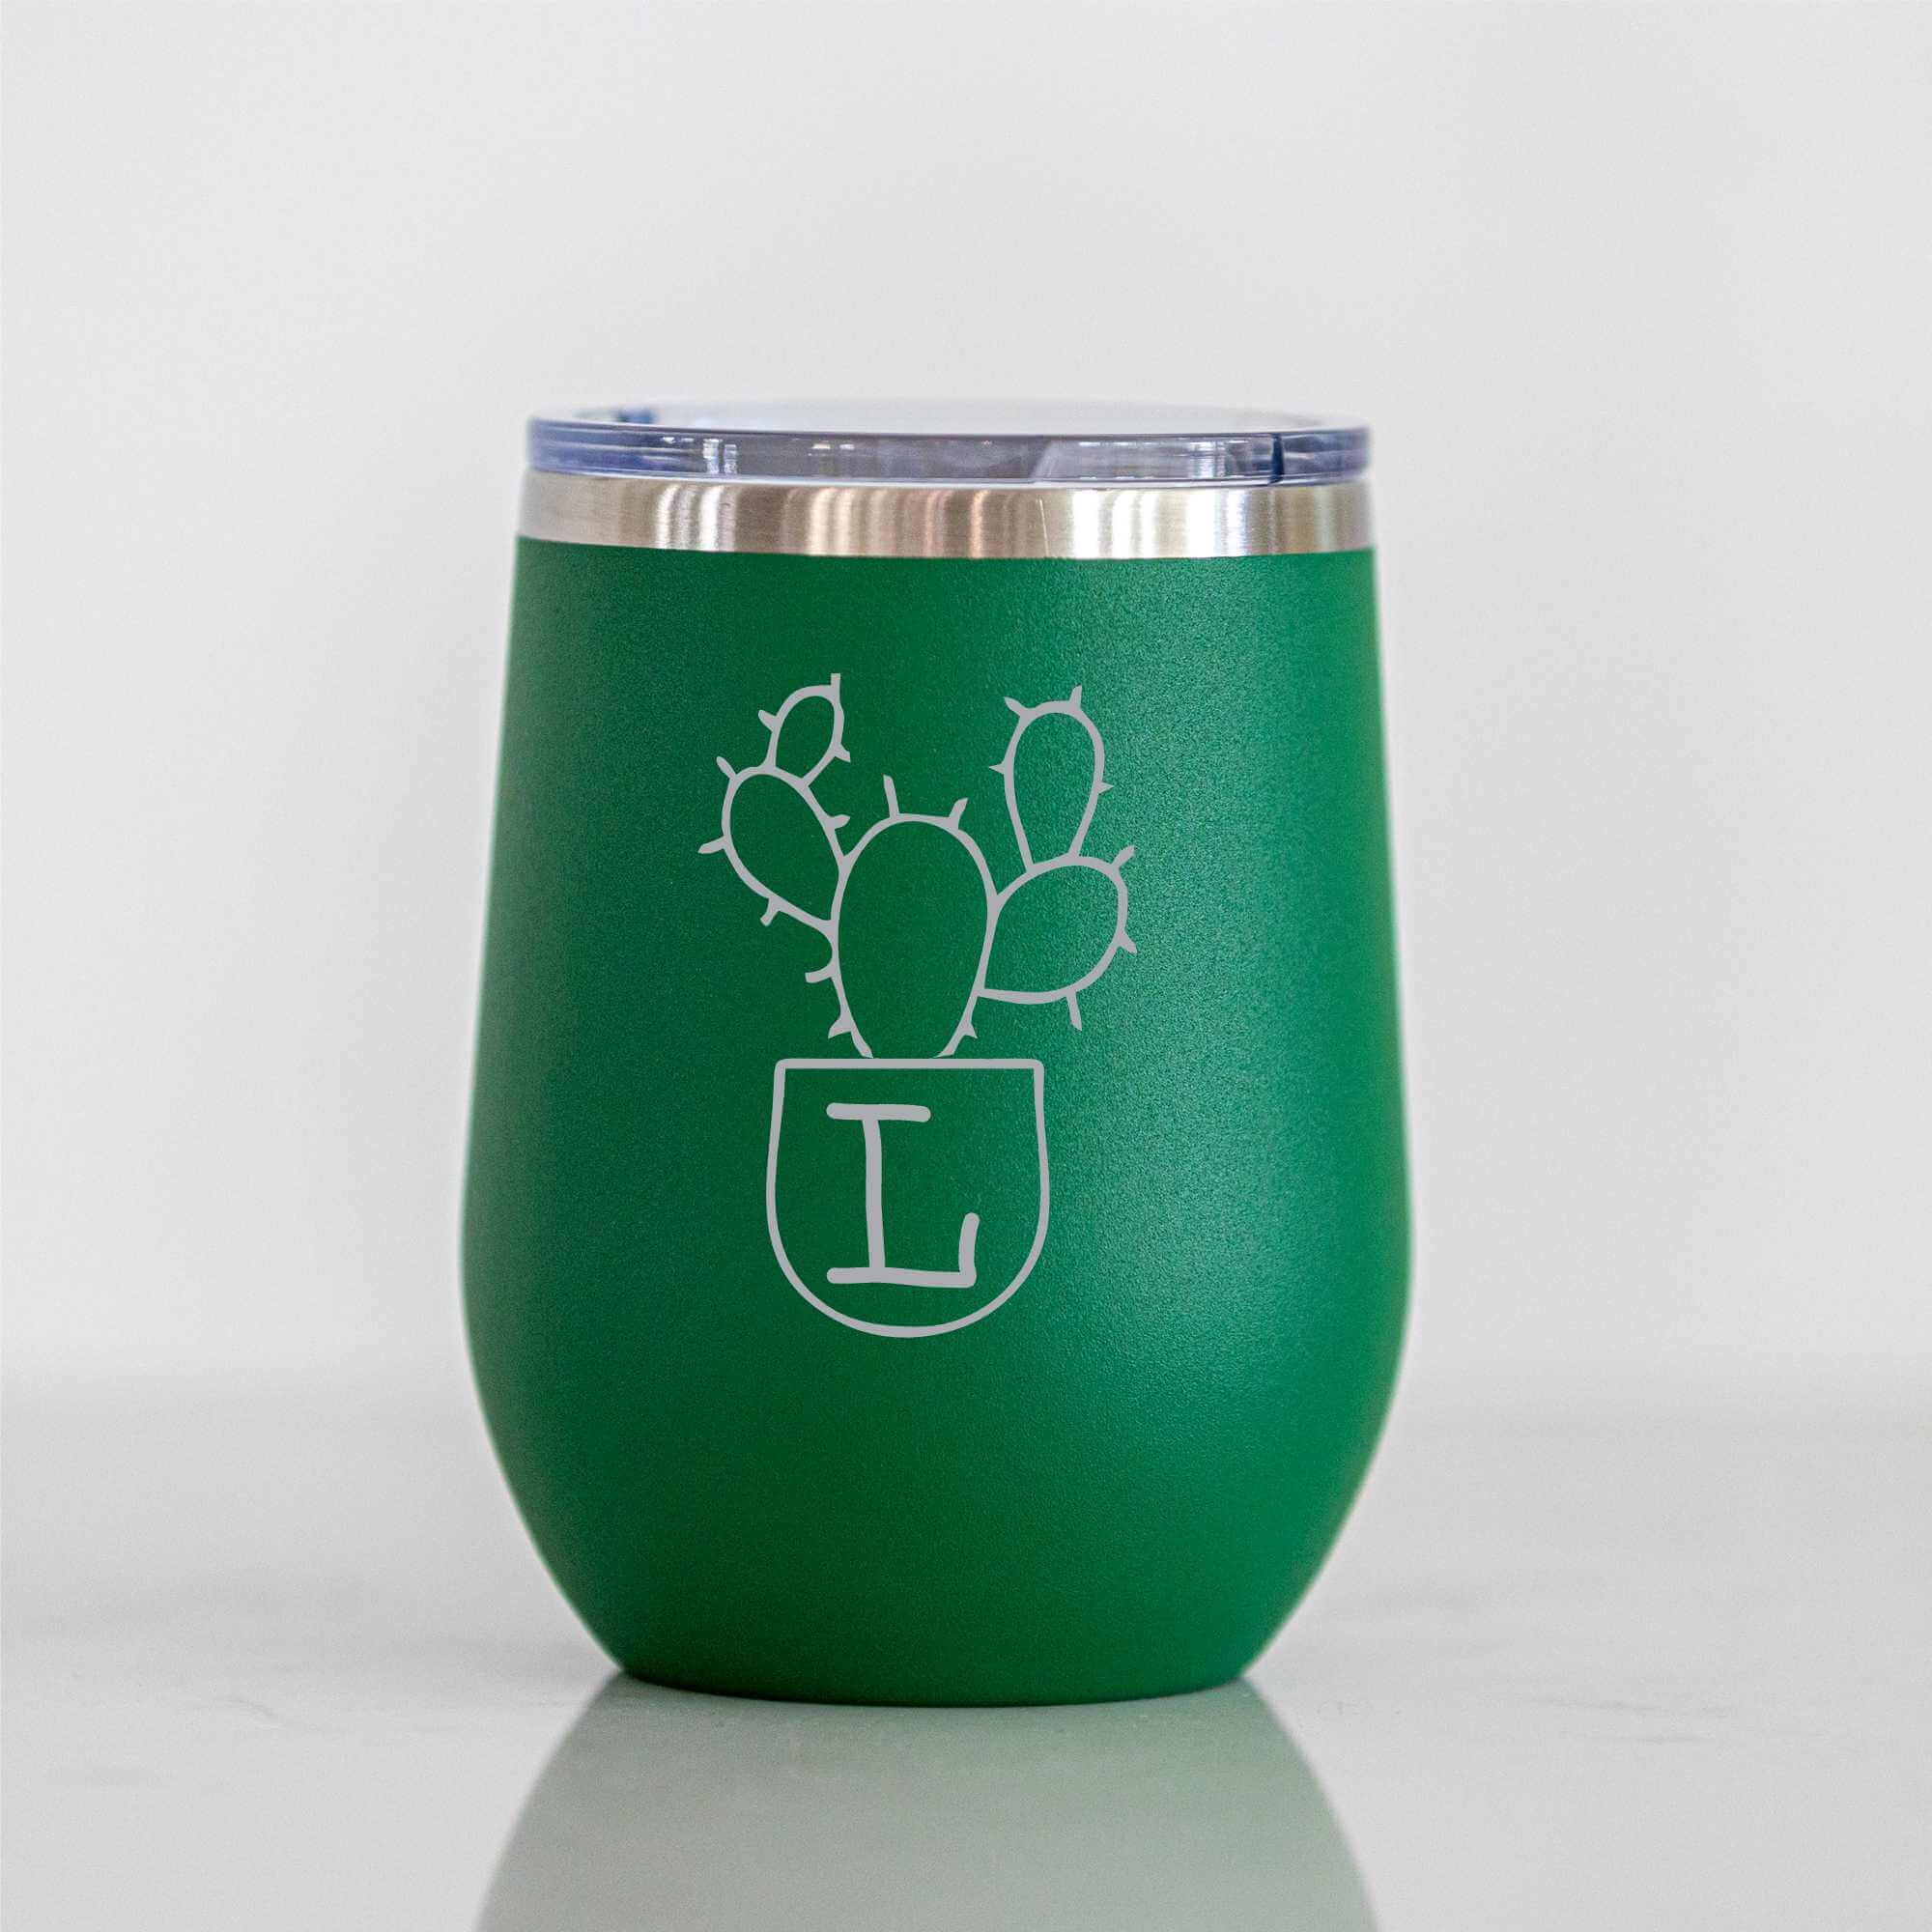 Cactus Tumblers and Bar Board with Initial - 3pc Gift Box